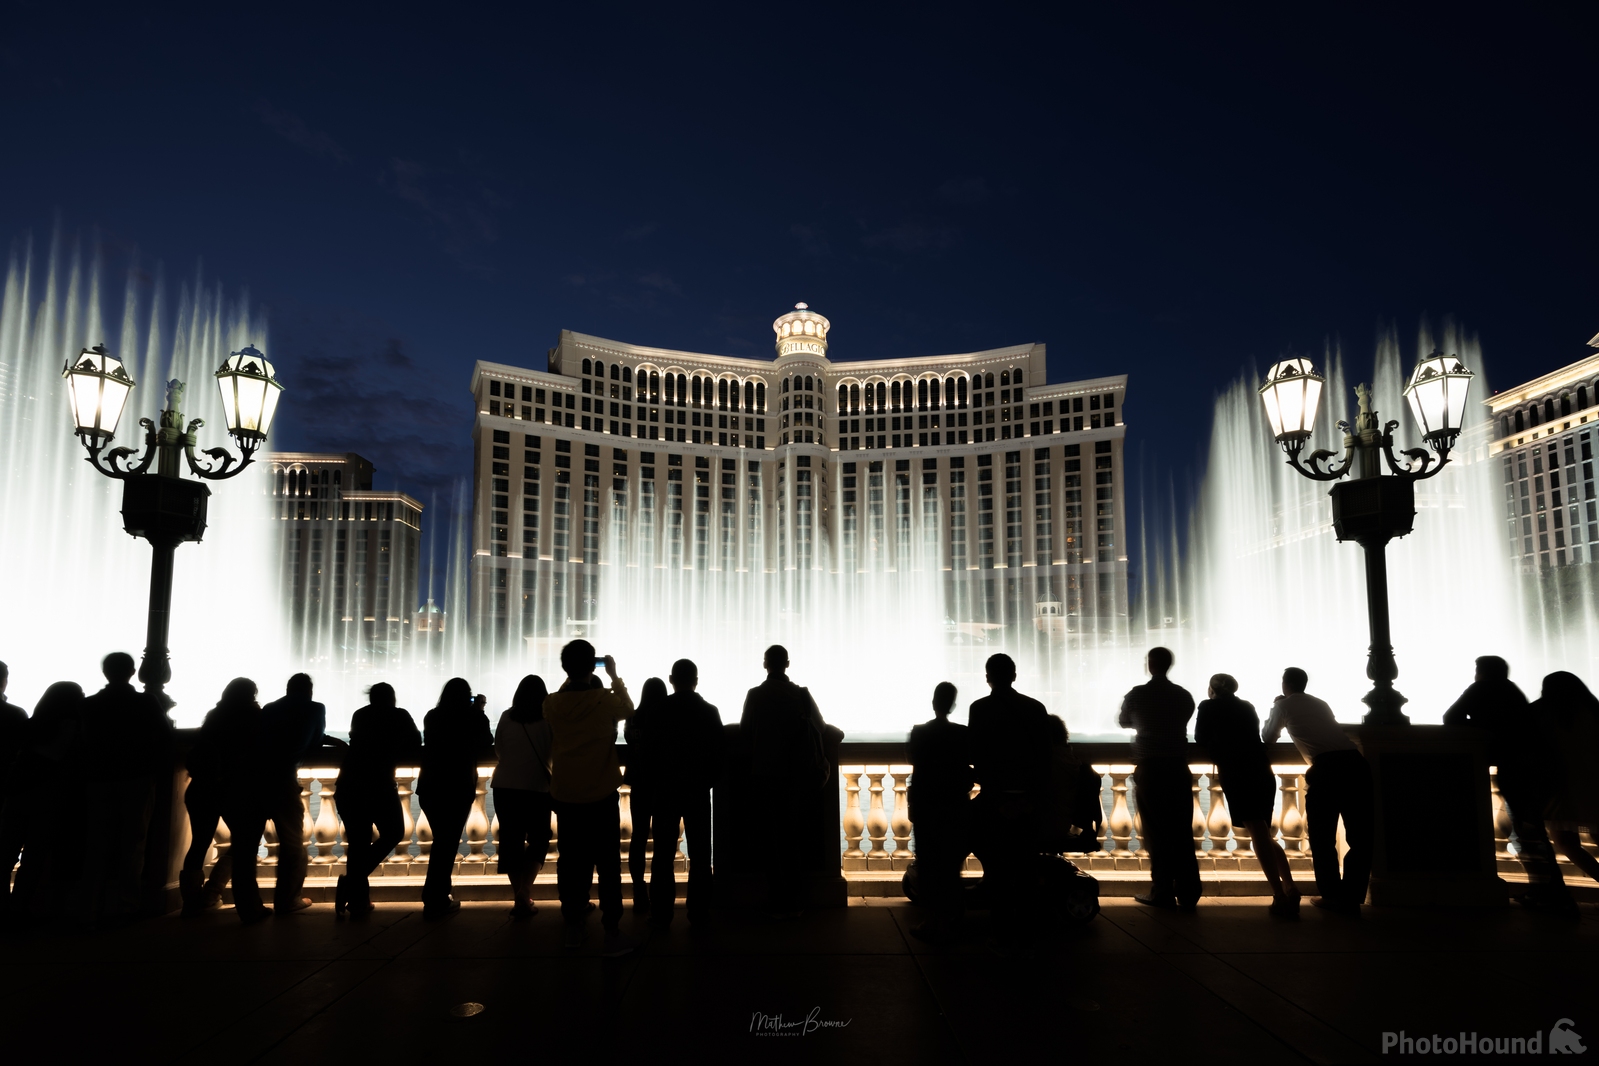 Image of Bellagio Fountains by Mathew Browne